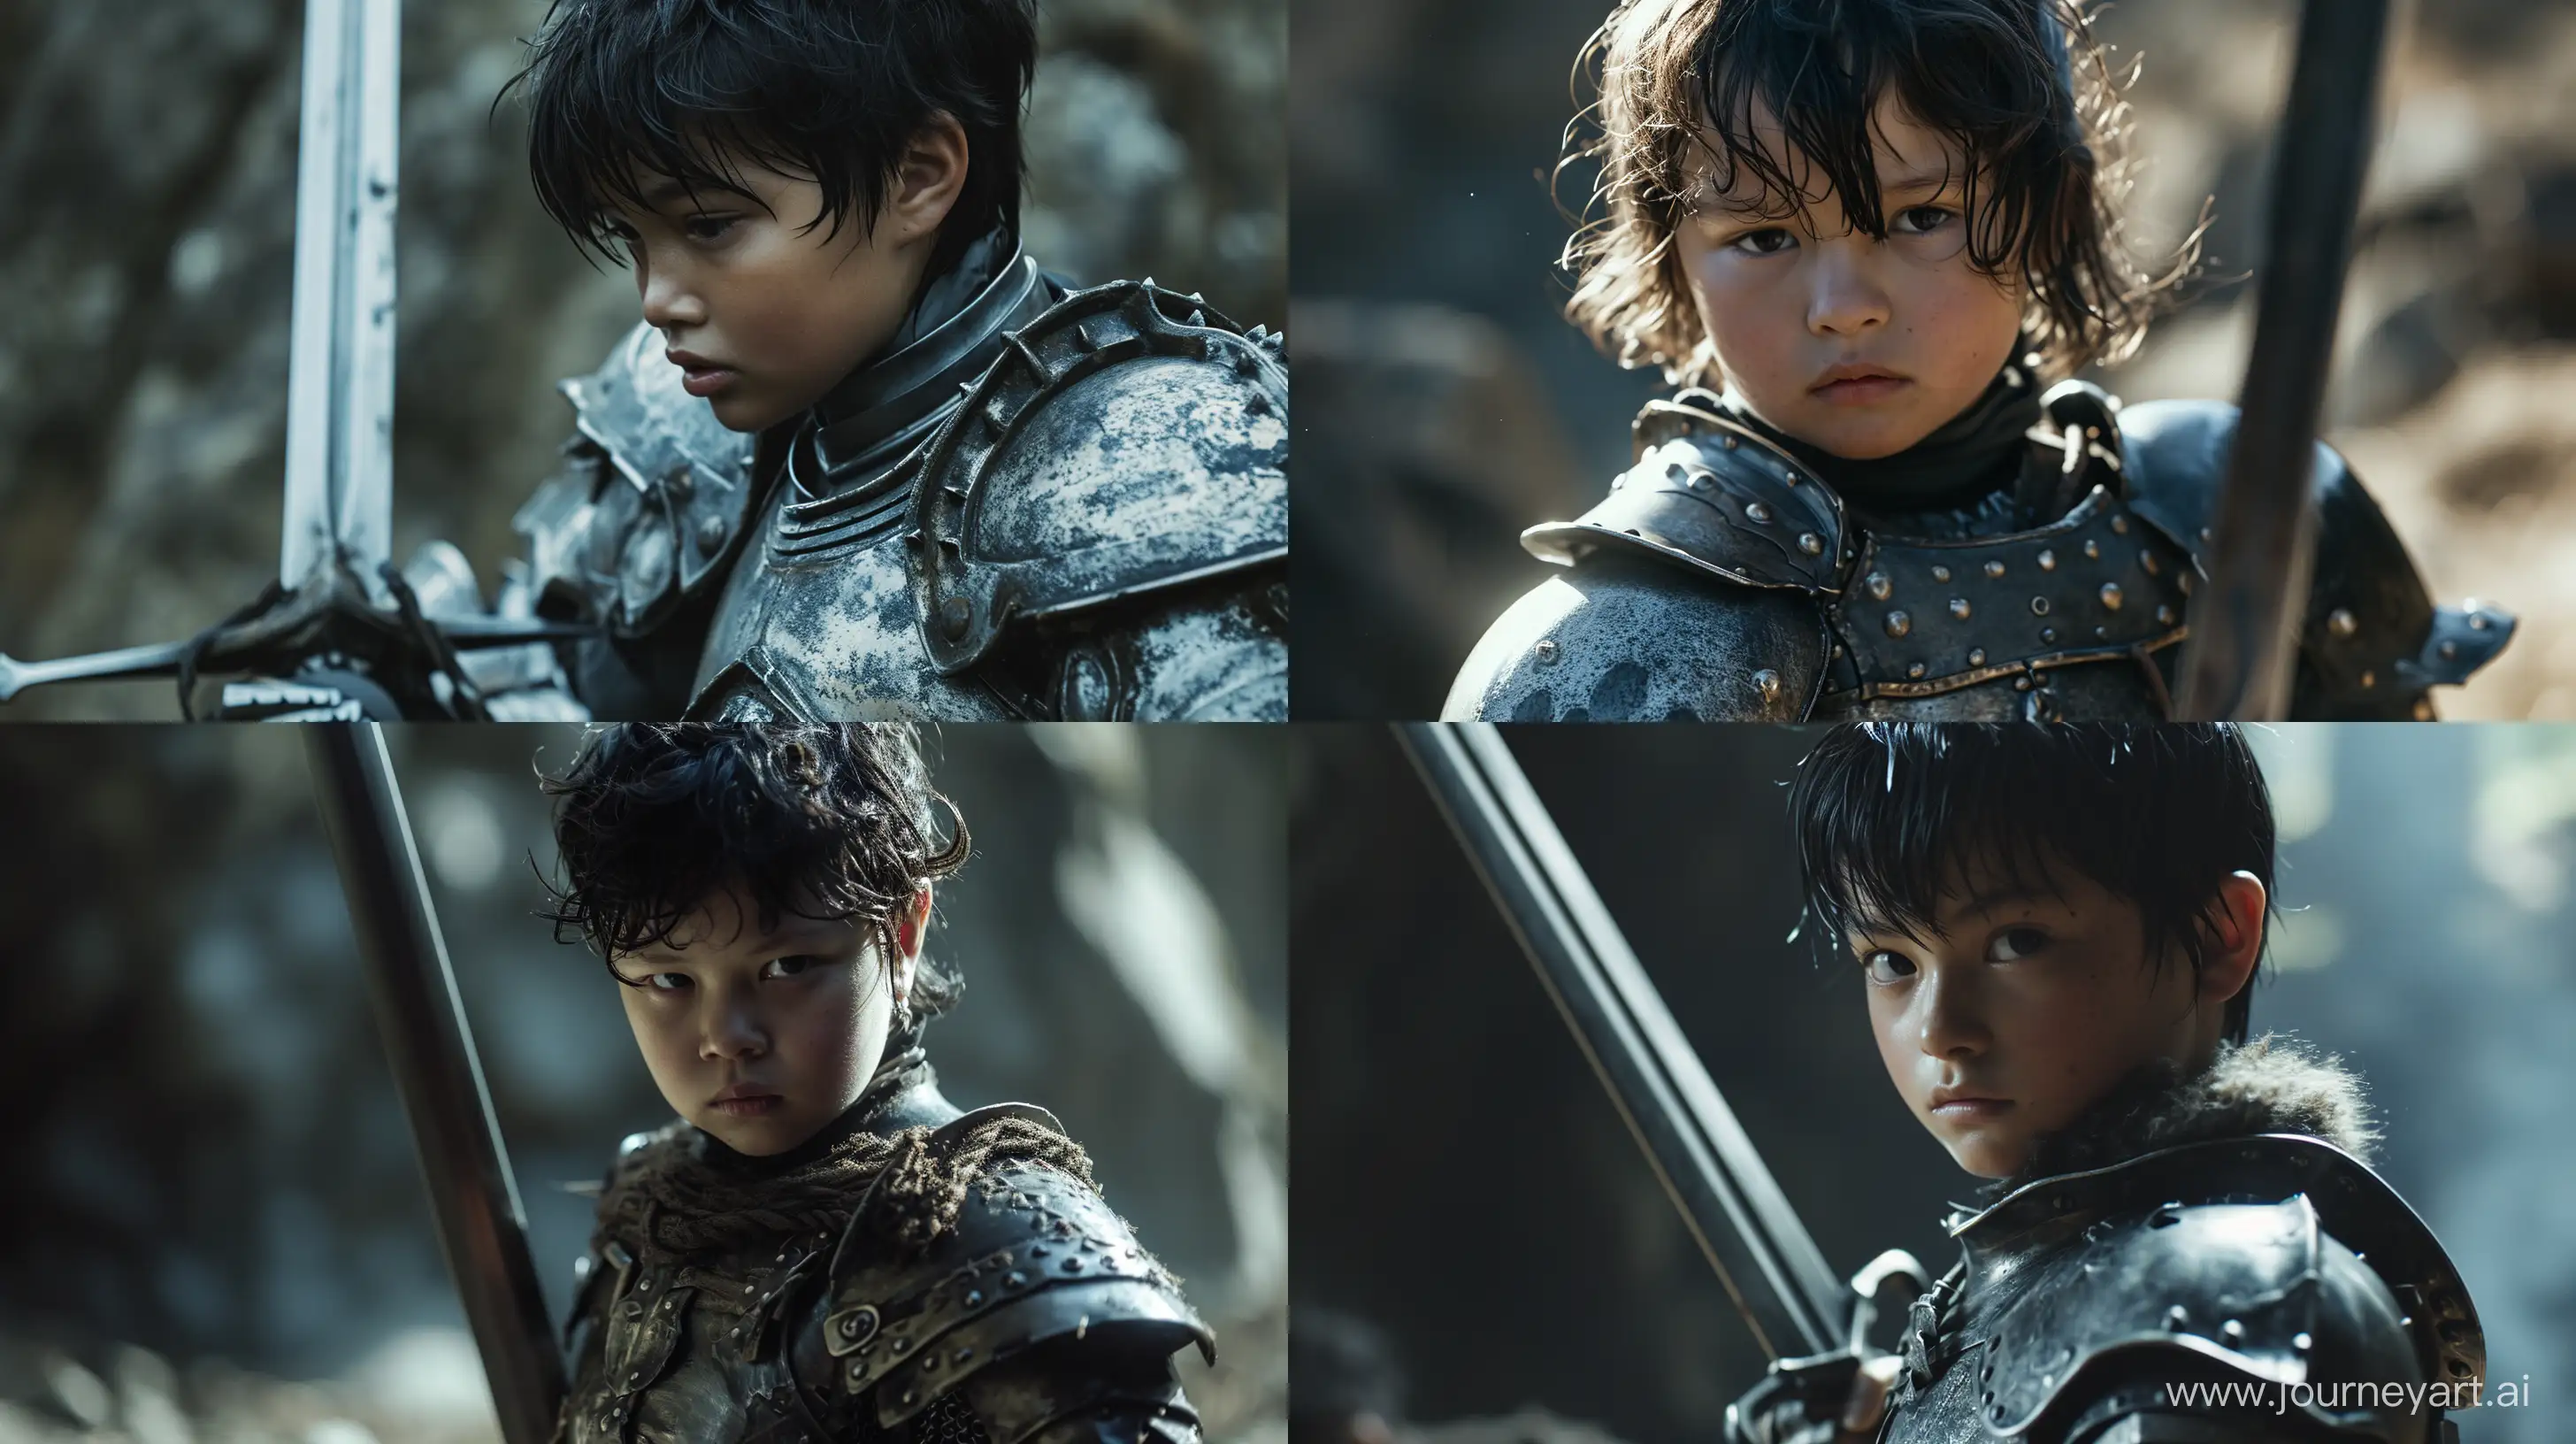 Bran-Stark-Child-in-Griffith-Armor-with-Stormbringer-Sword-Cinematic-Fantasy-Portrait